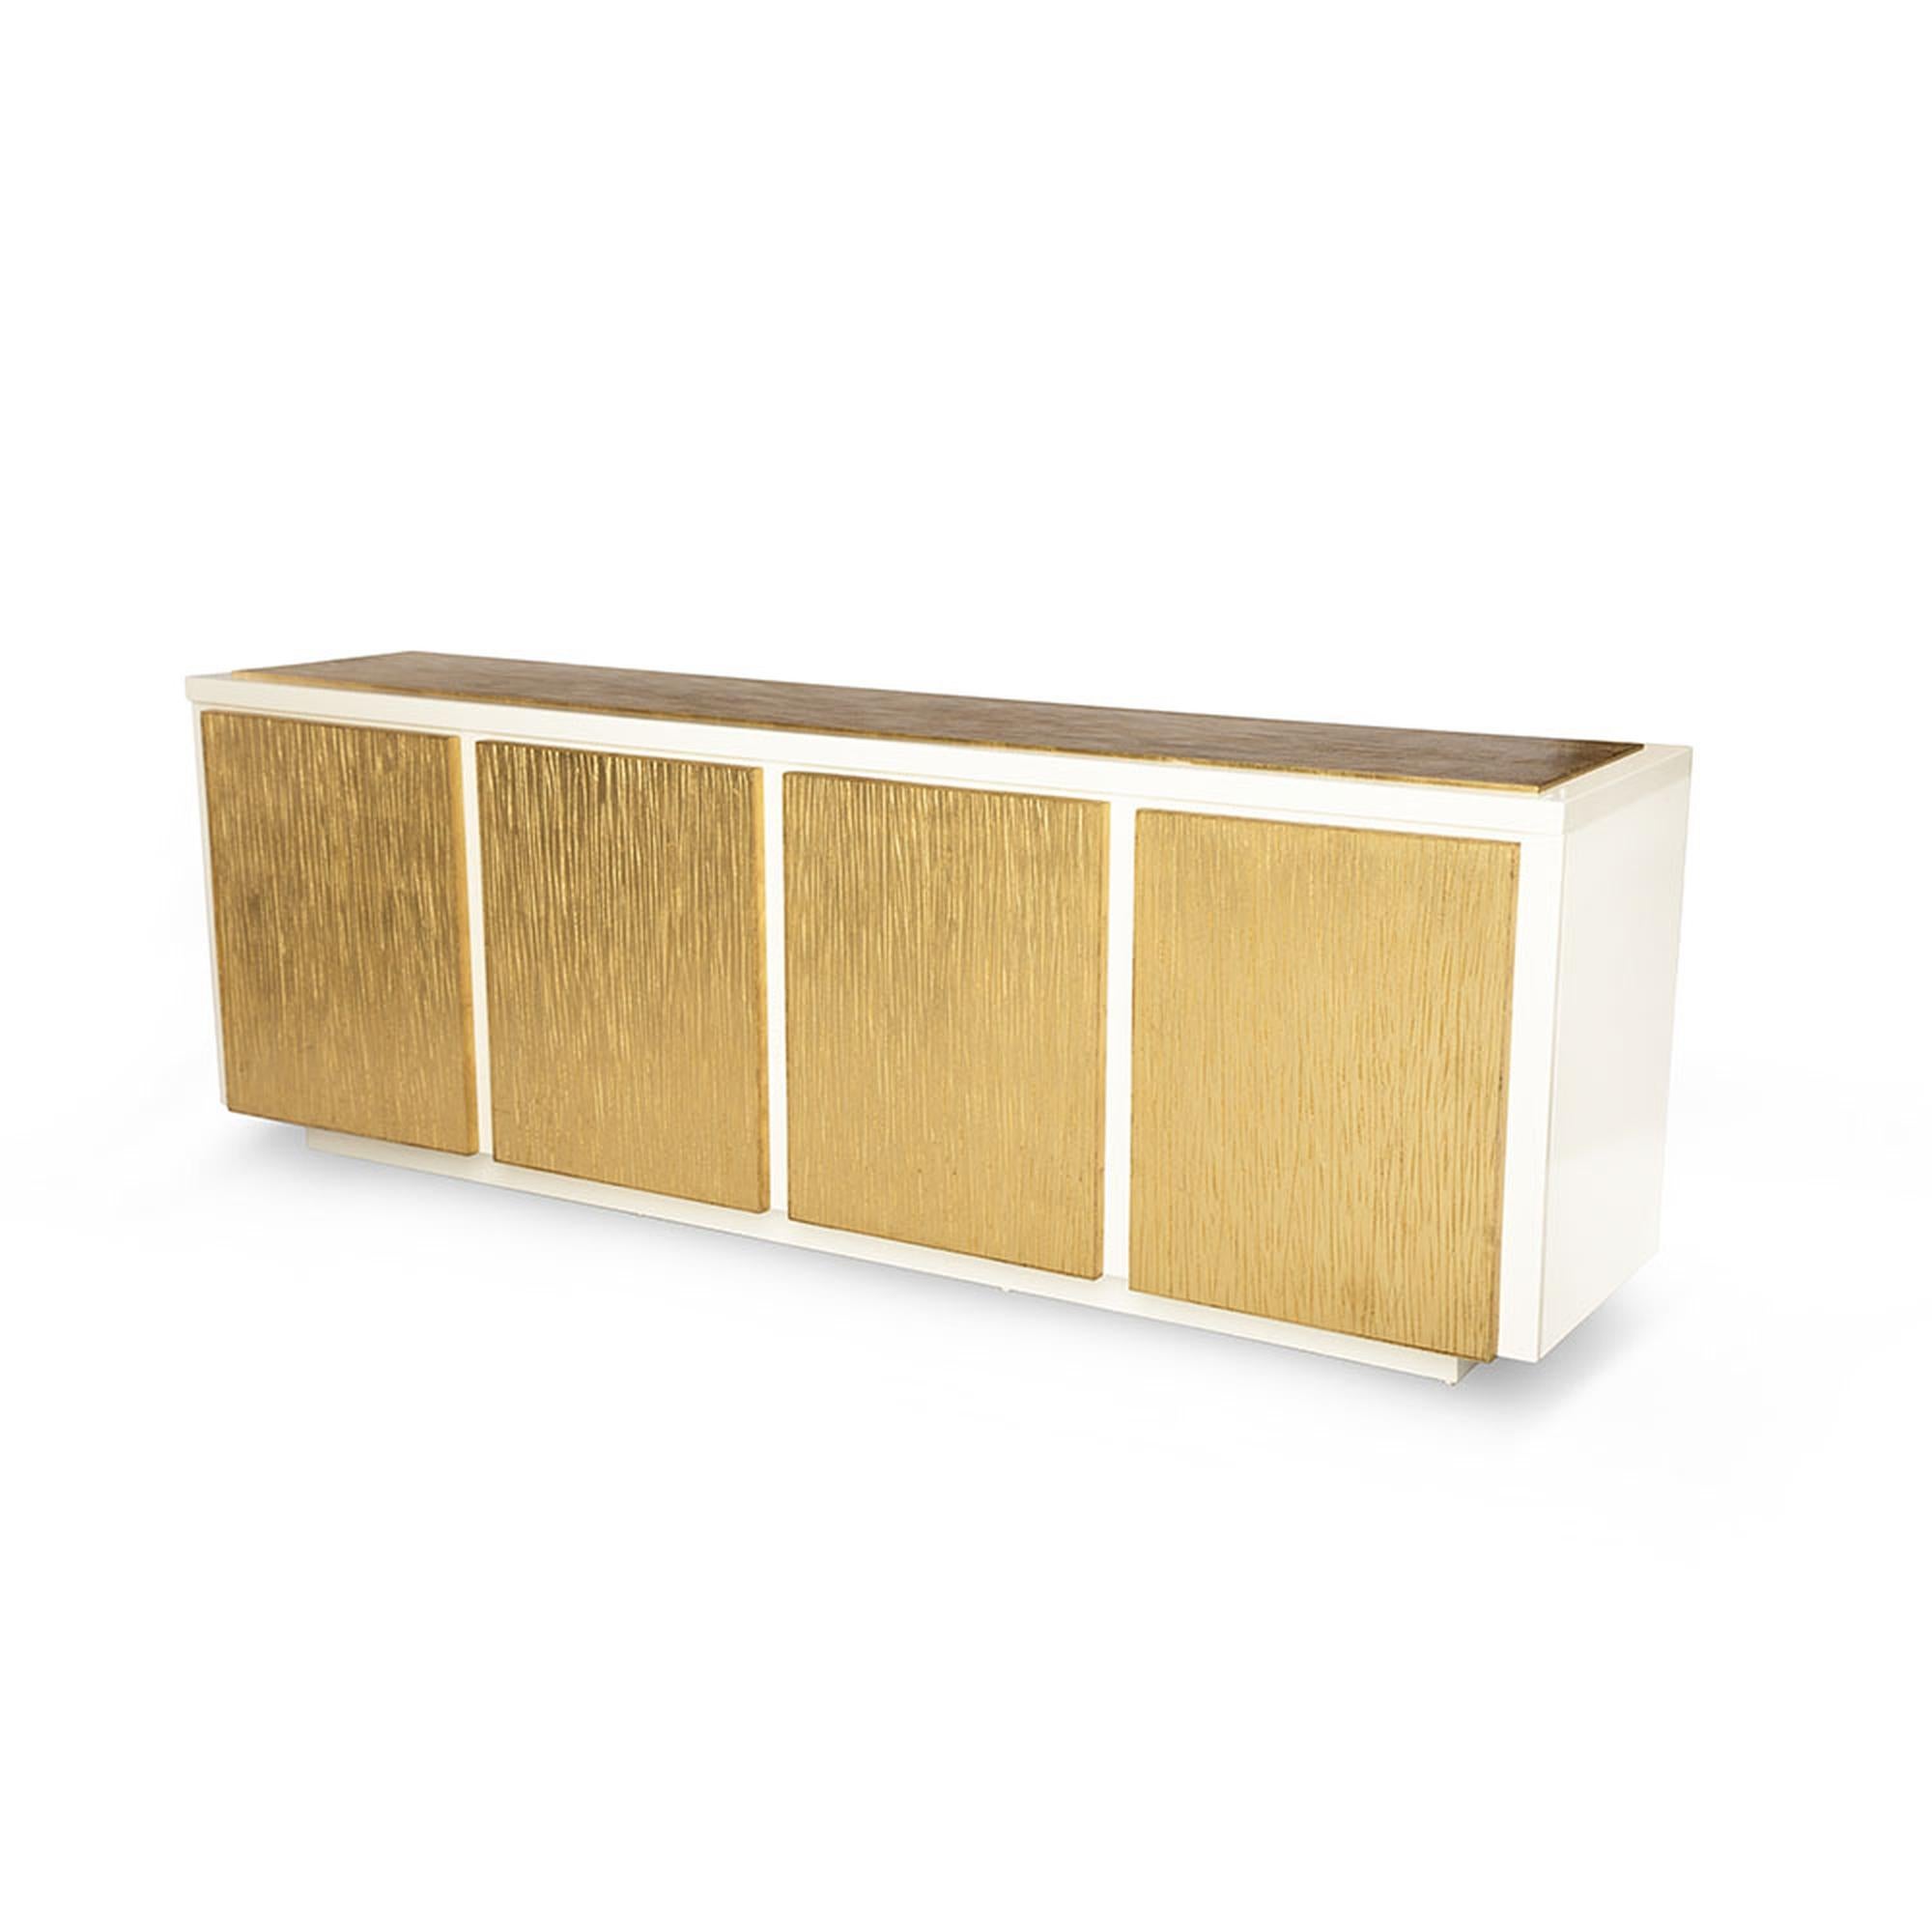 The Balboa credenza is an incredibly sophisticated piece, from the carefully chiseled, hand gilded doors and top, to the beautifully hand-lacquered smooth body. Finished to perfection, it serves as a gorgeous statement piece. The push-to-open doors